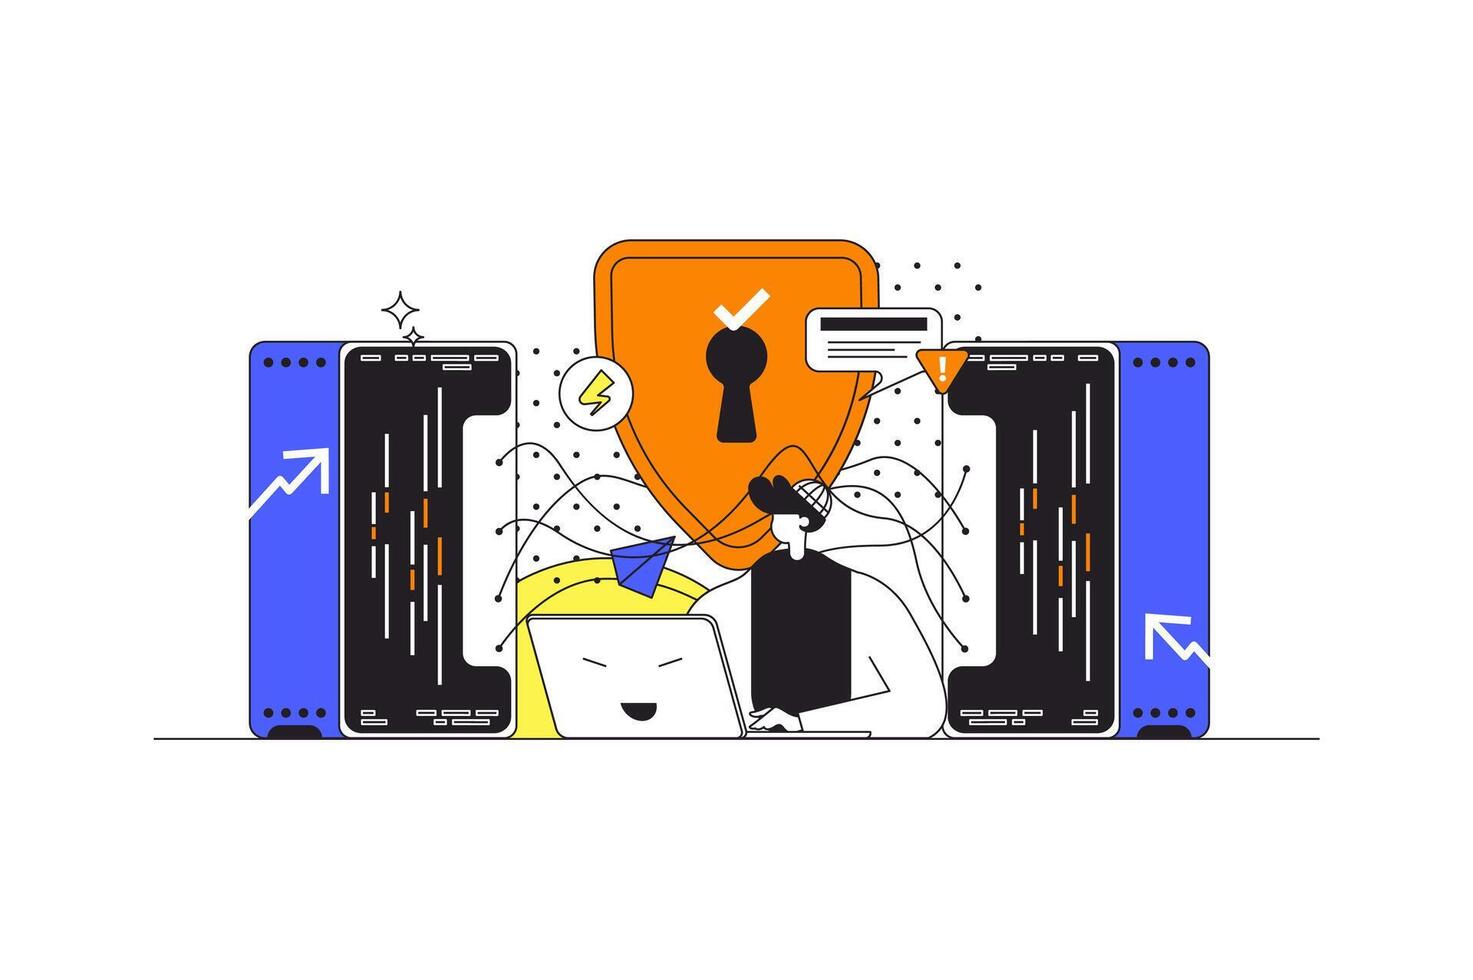 Network security web concept in flat outline design with characters. Man using secure login to personal account, firewall protecting data and files on laptop, people scene. illustration. vector